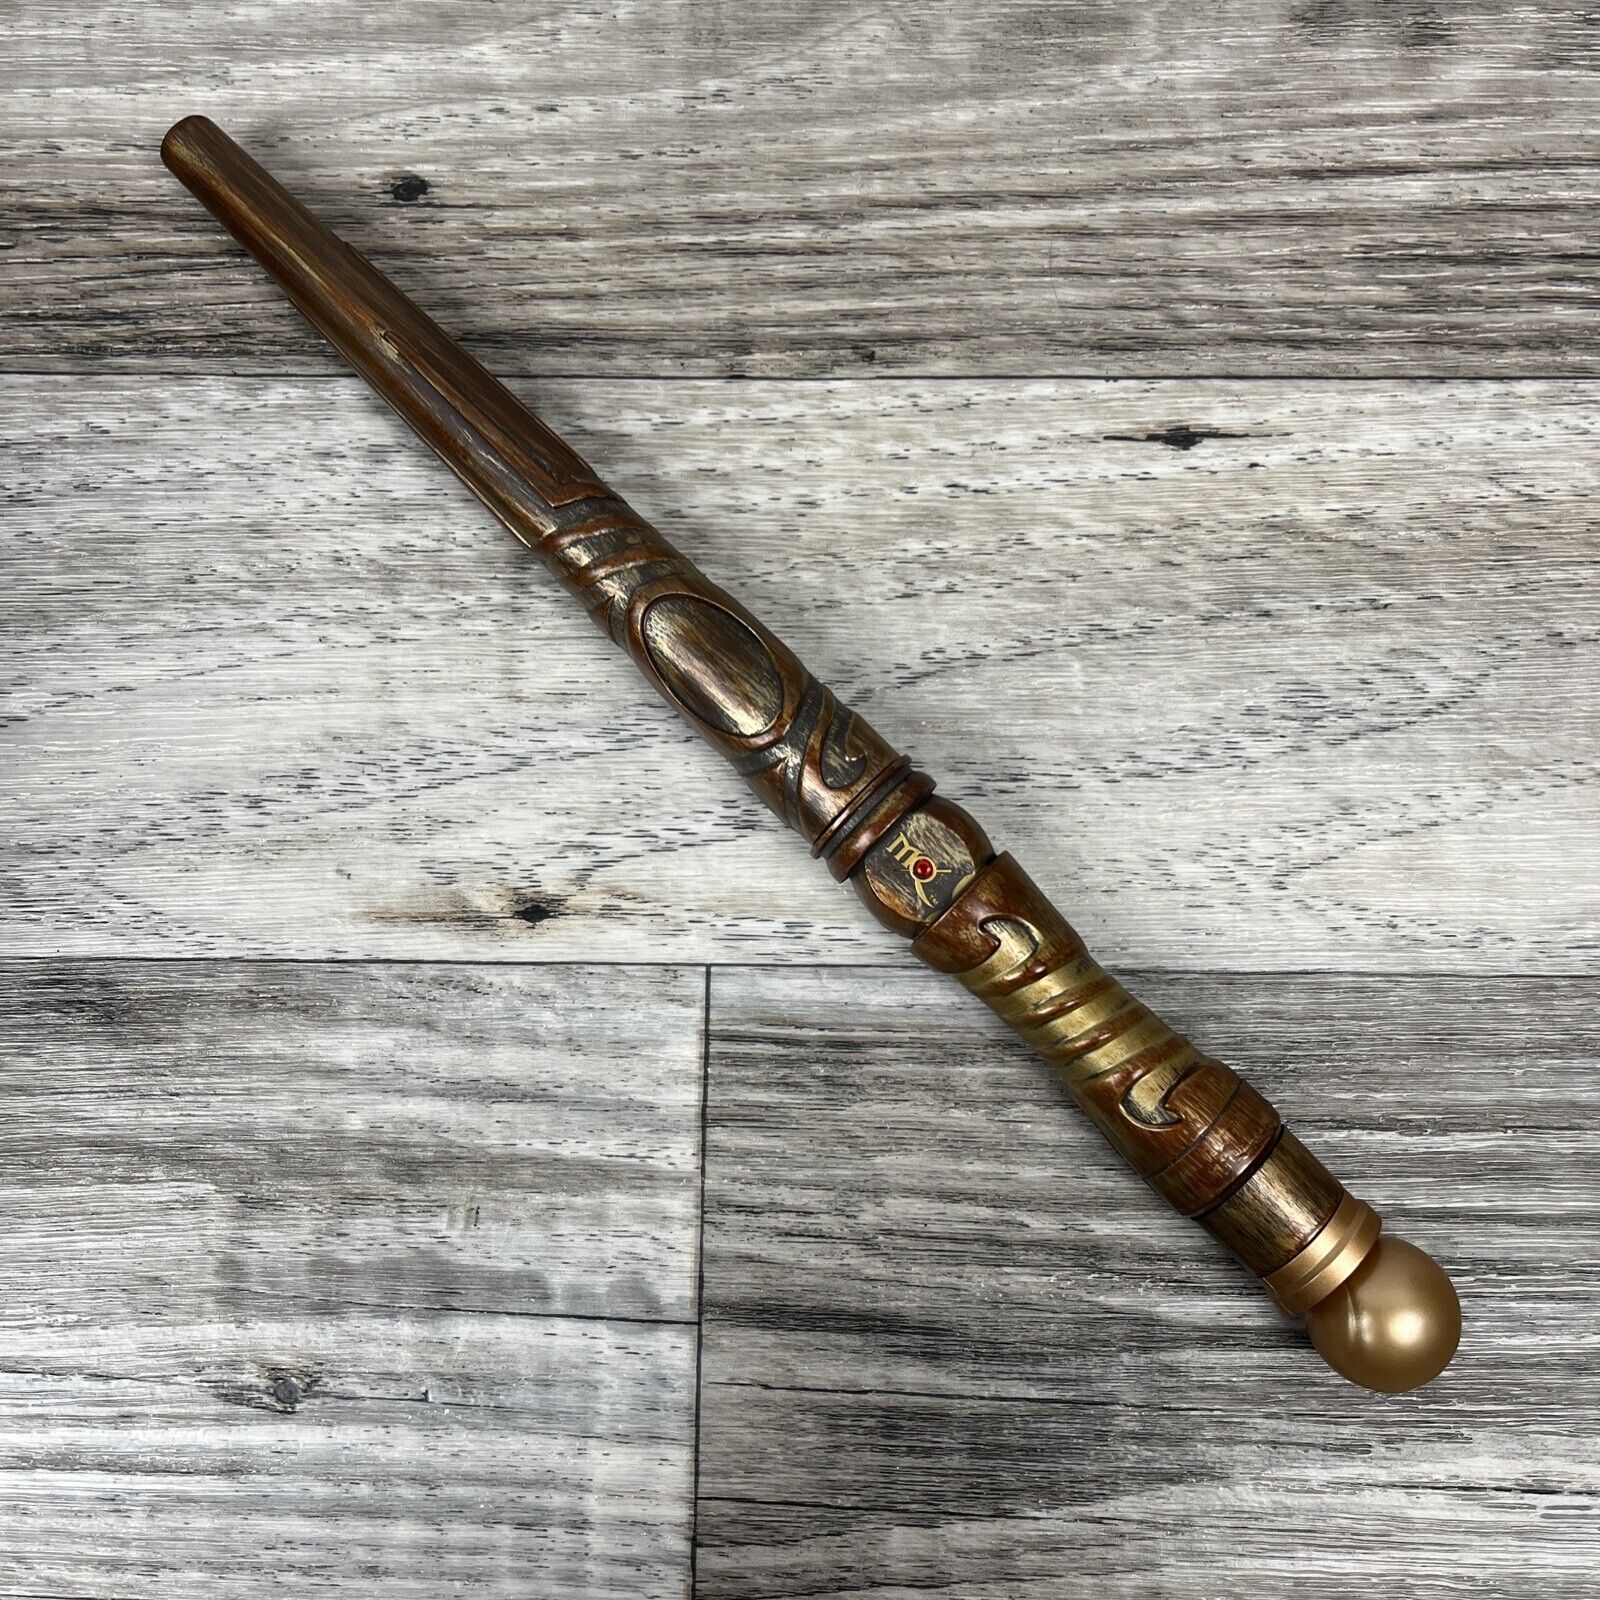 Magiquest Great Wolf Lodge Magic Wand Silver Gold With Gold Top, Untested